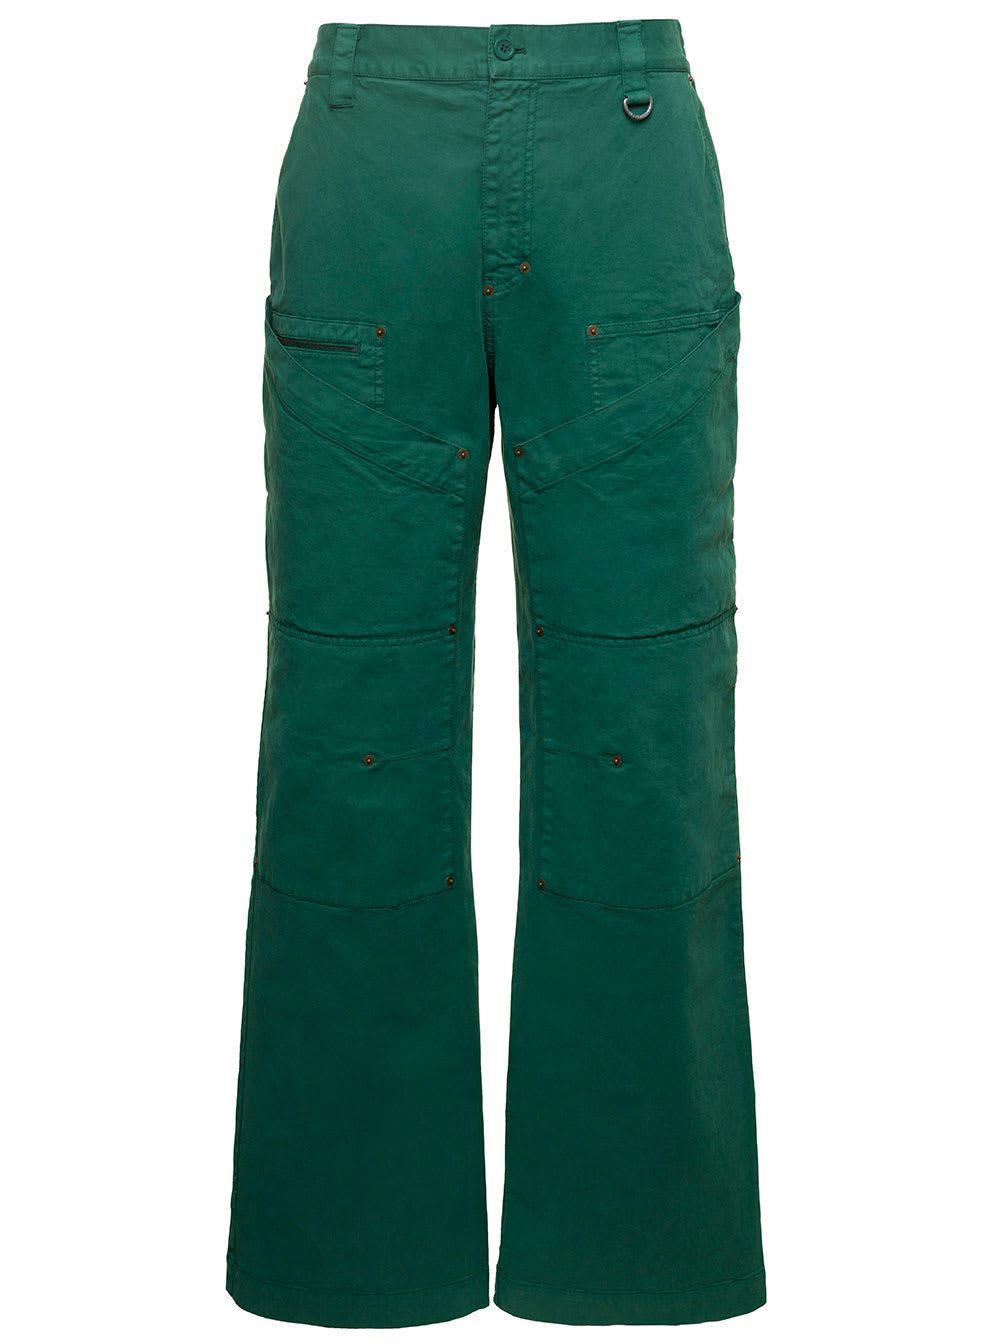 MARINE SERRE GREEN WIDE LEG JEANS WITH CONTRASTING LOGO EMBROIDERY IN STRETCH COTTON DENIM WOMAN